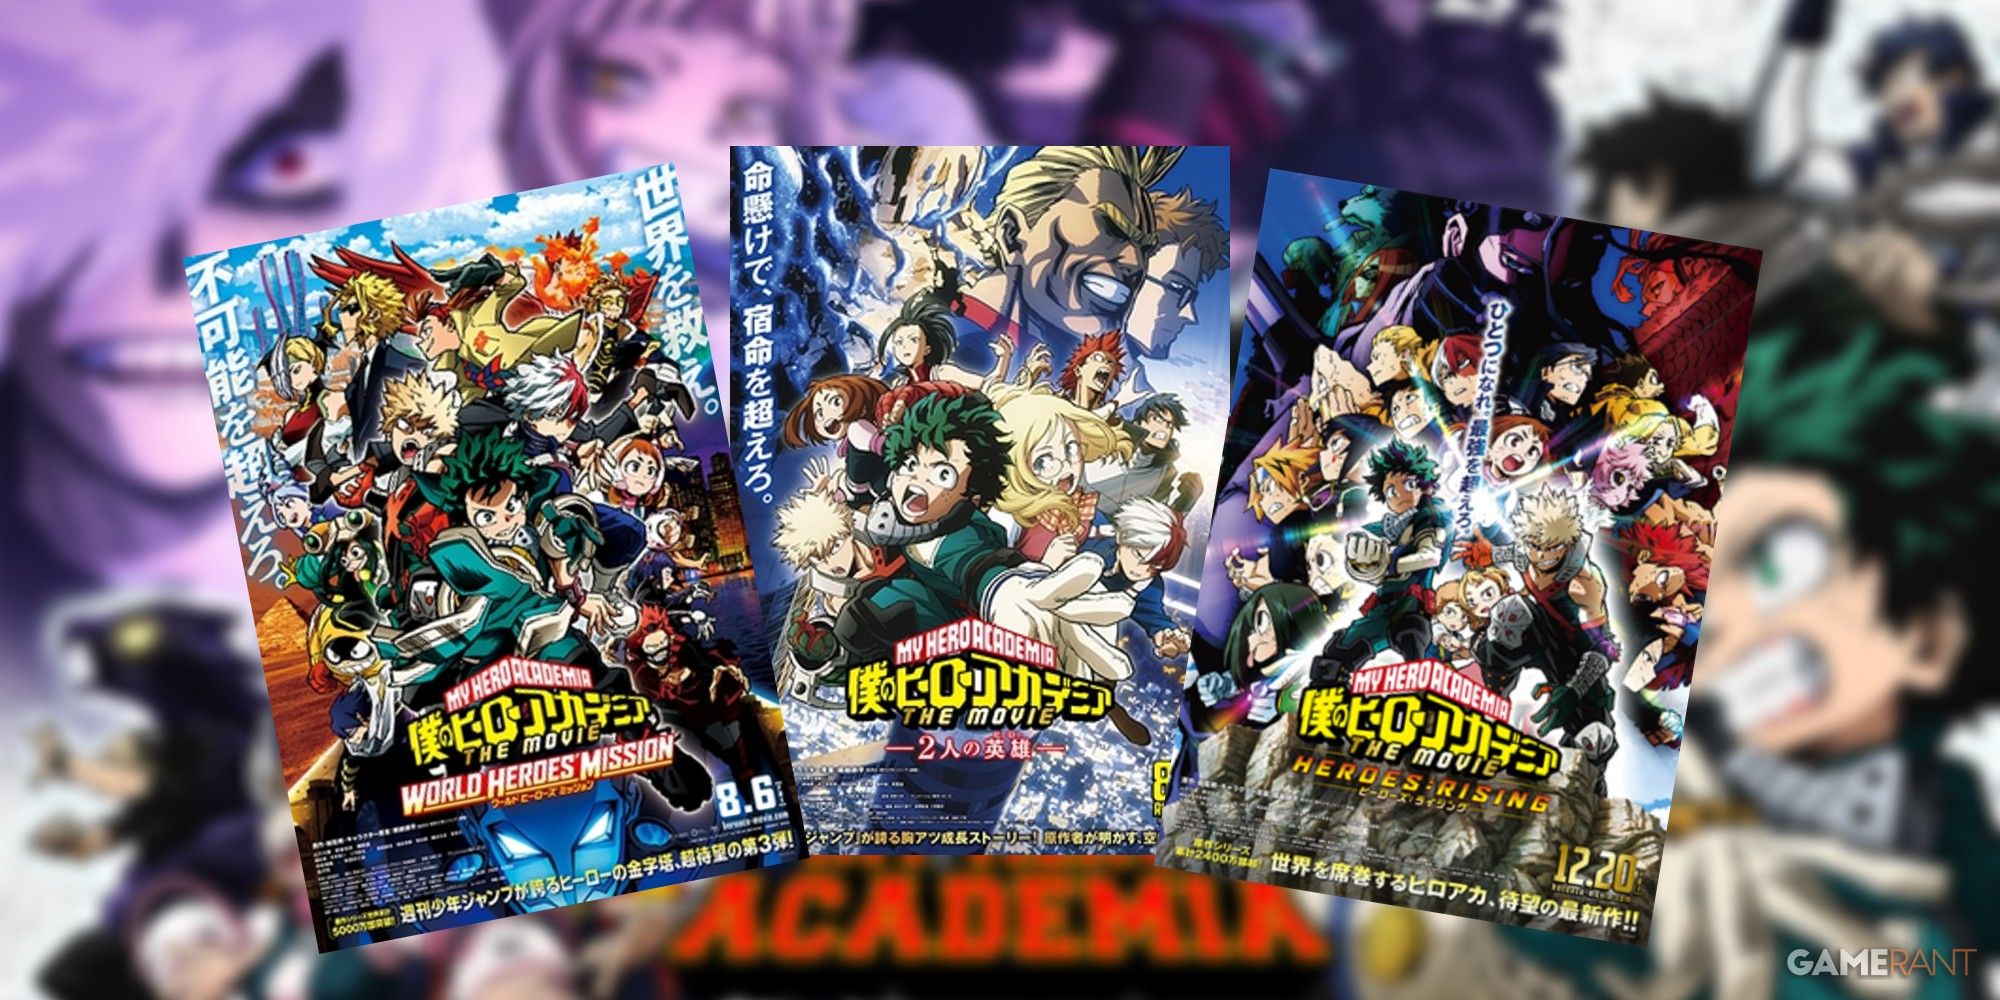 REVIEW  Heroes On the Run in Latest My Hero Academia Film